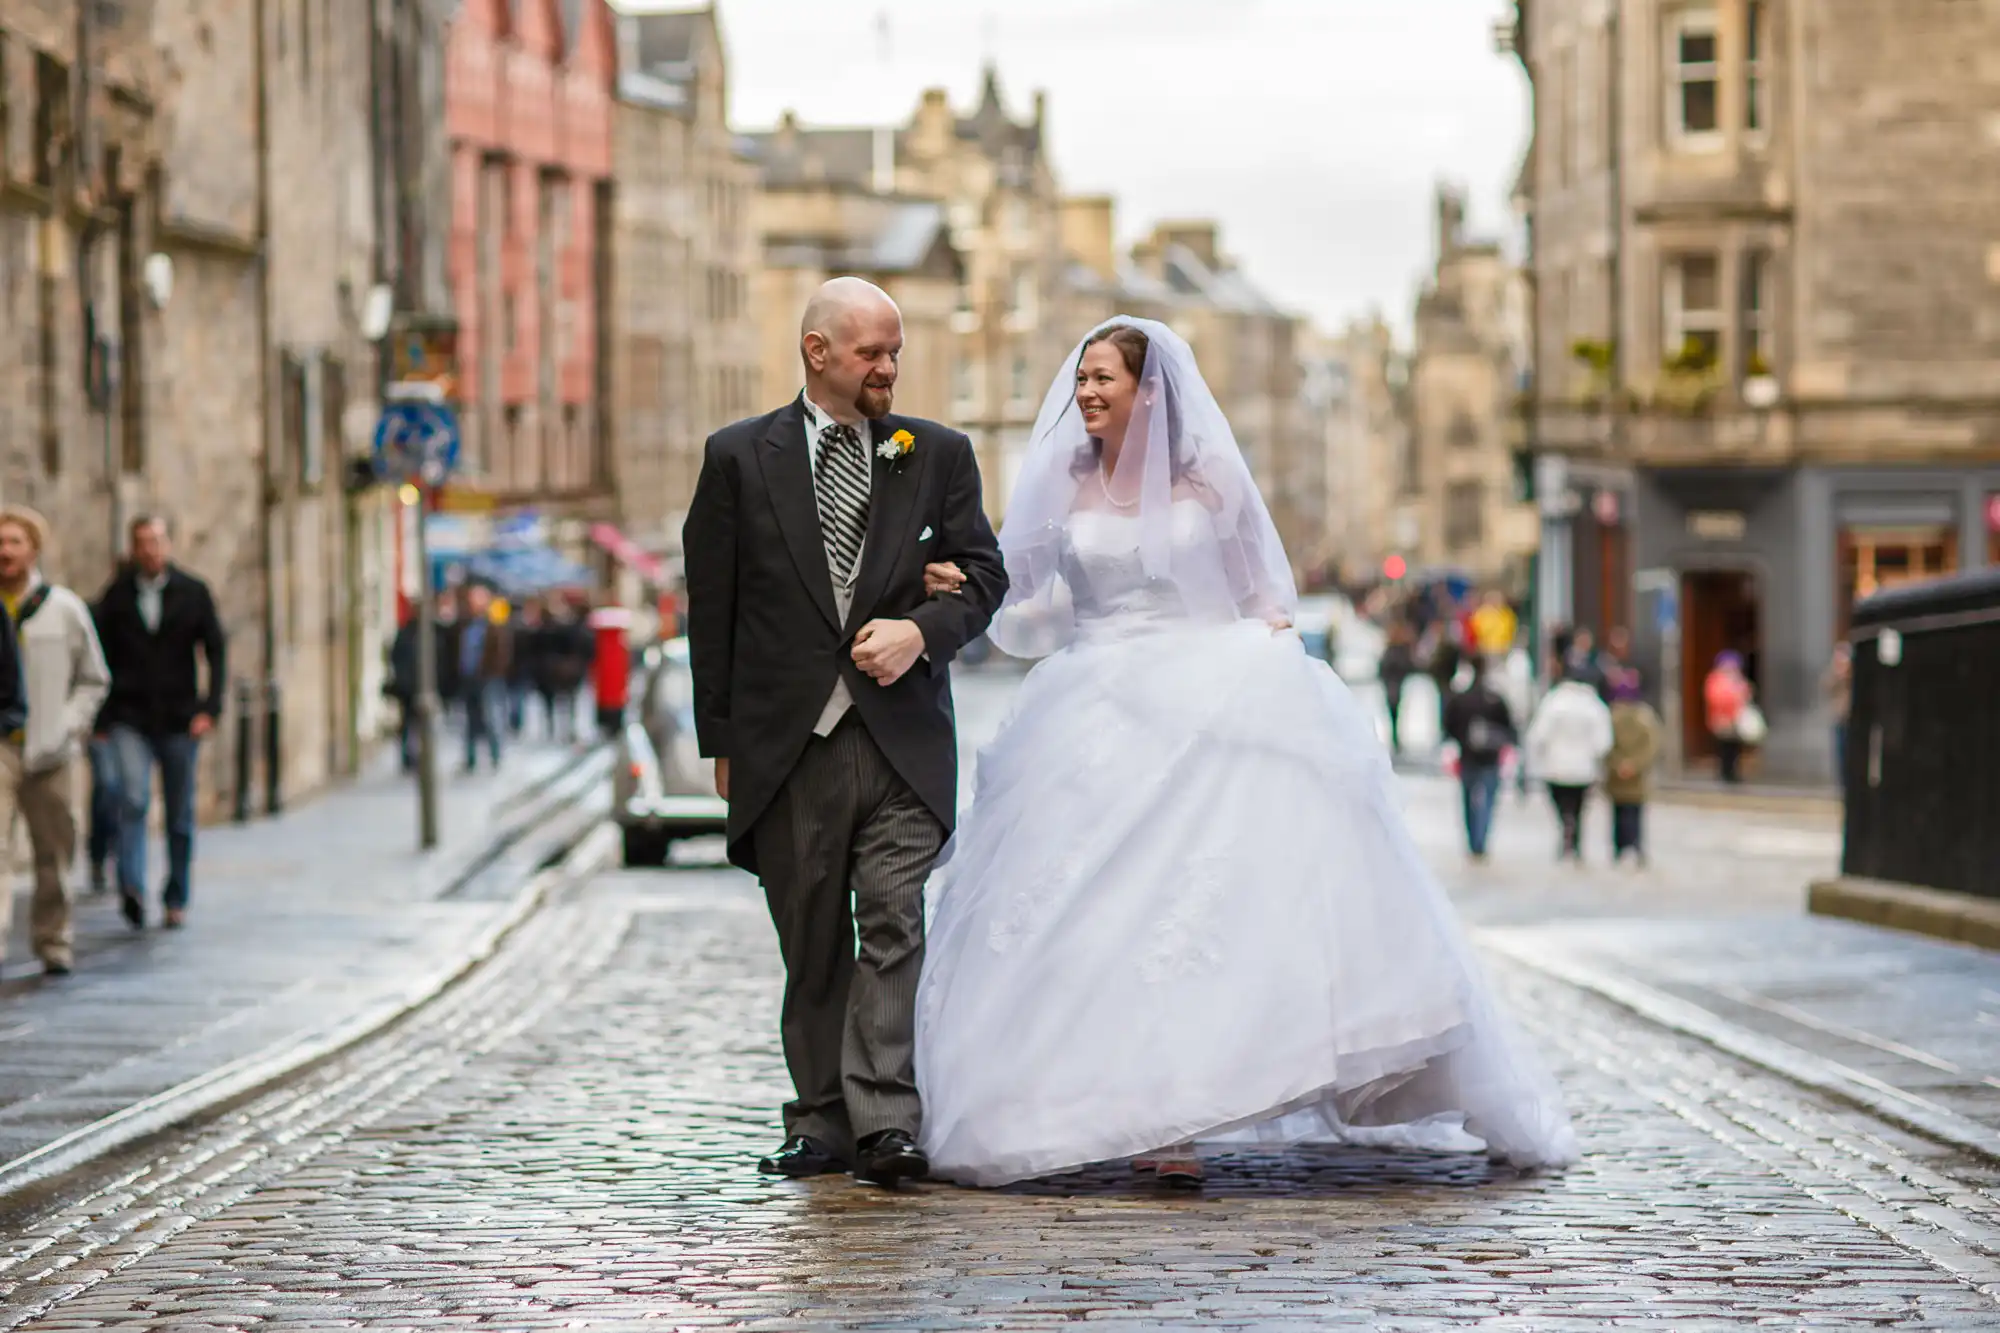 A bride and groom walk hand in hand on a cobbled street, smiling joyfully, with people and historic buildings in the background.